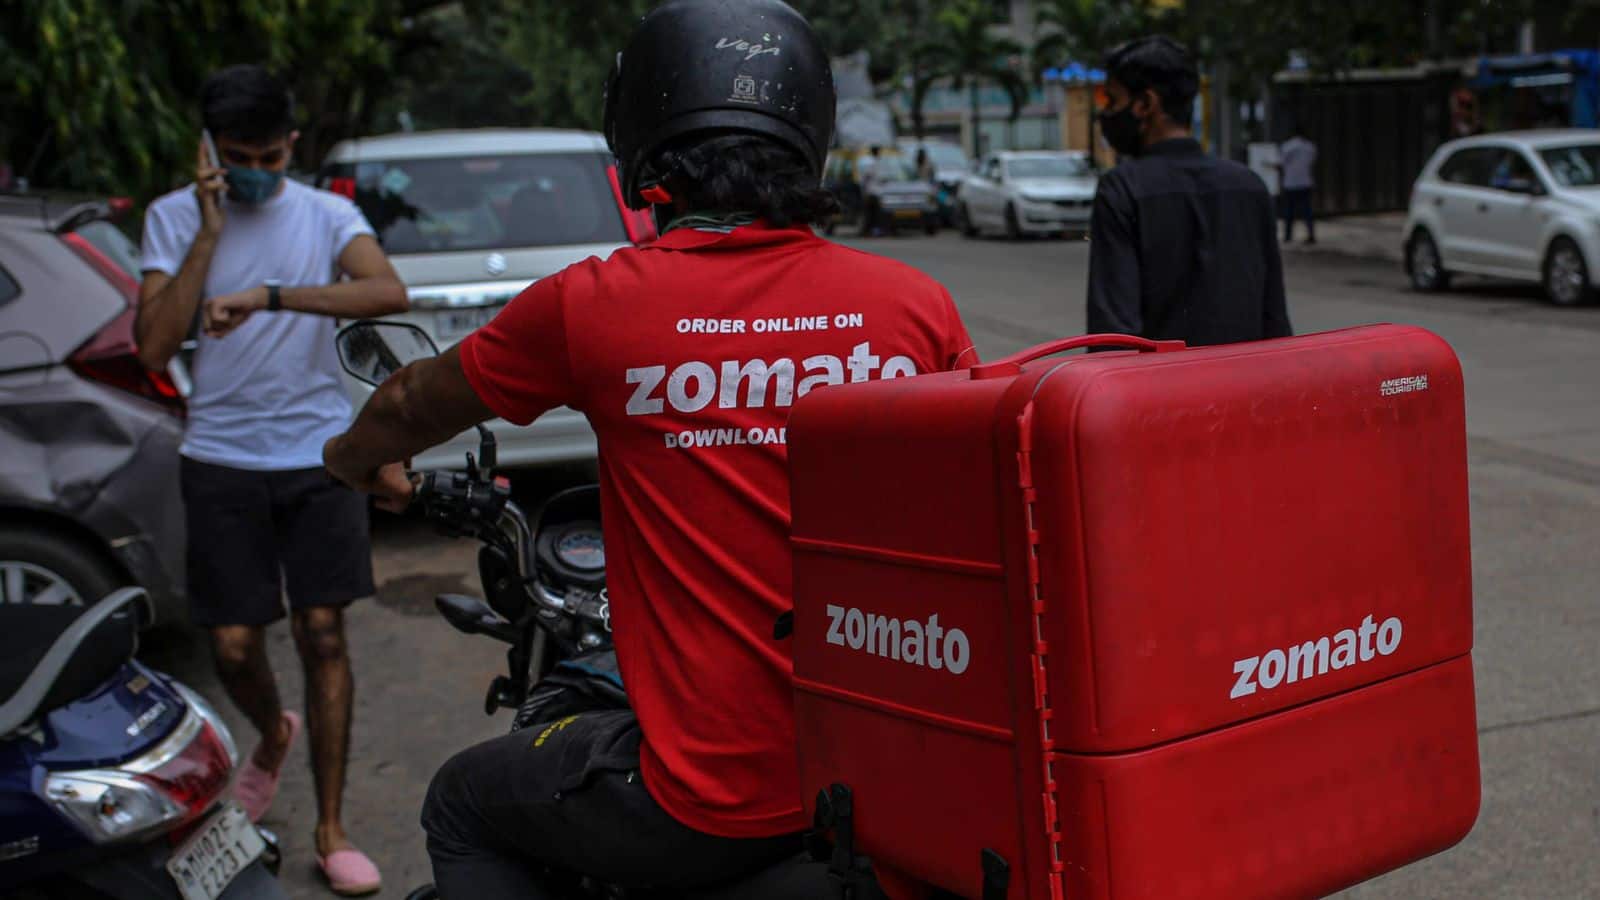 Customer made a weird request to Zomato